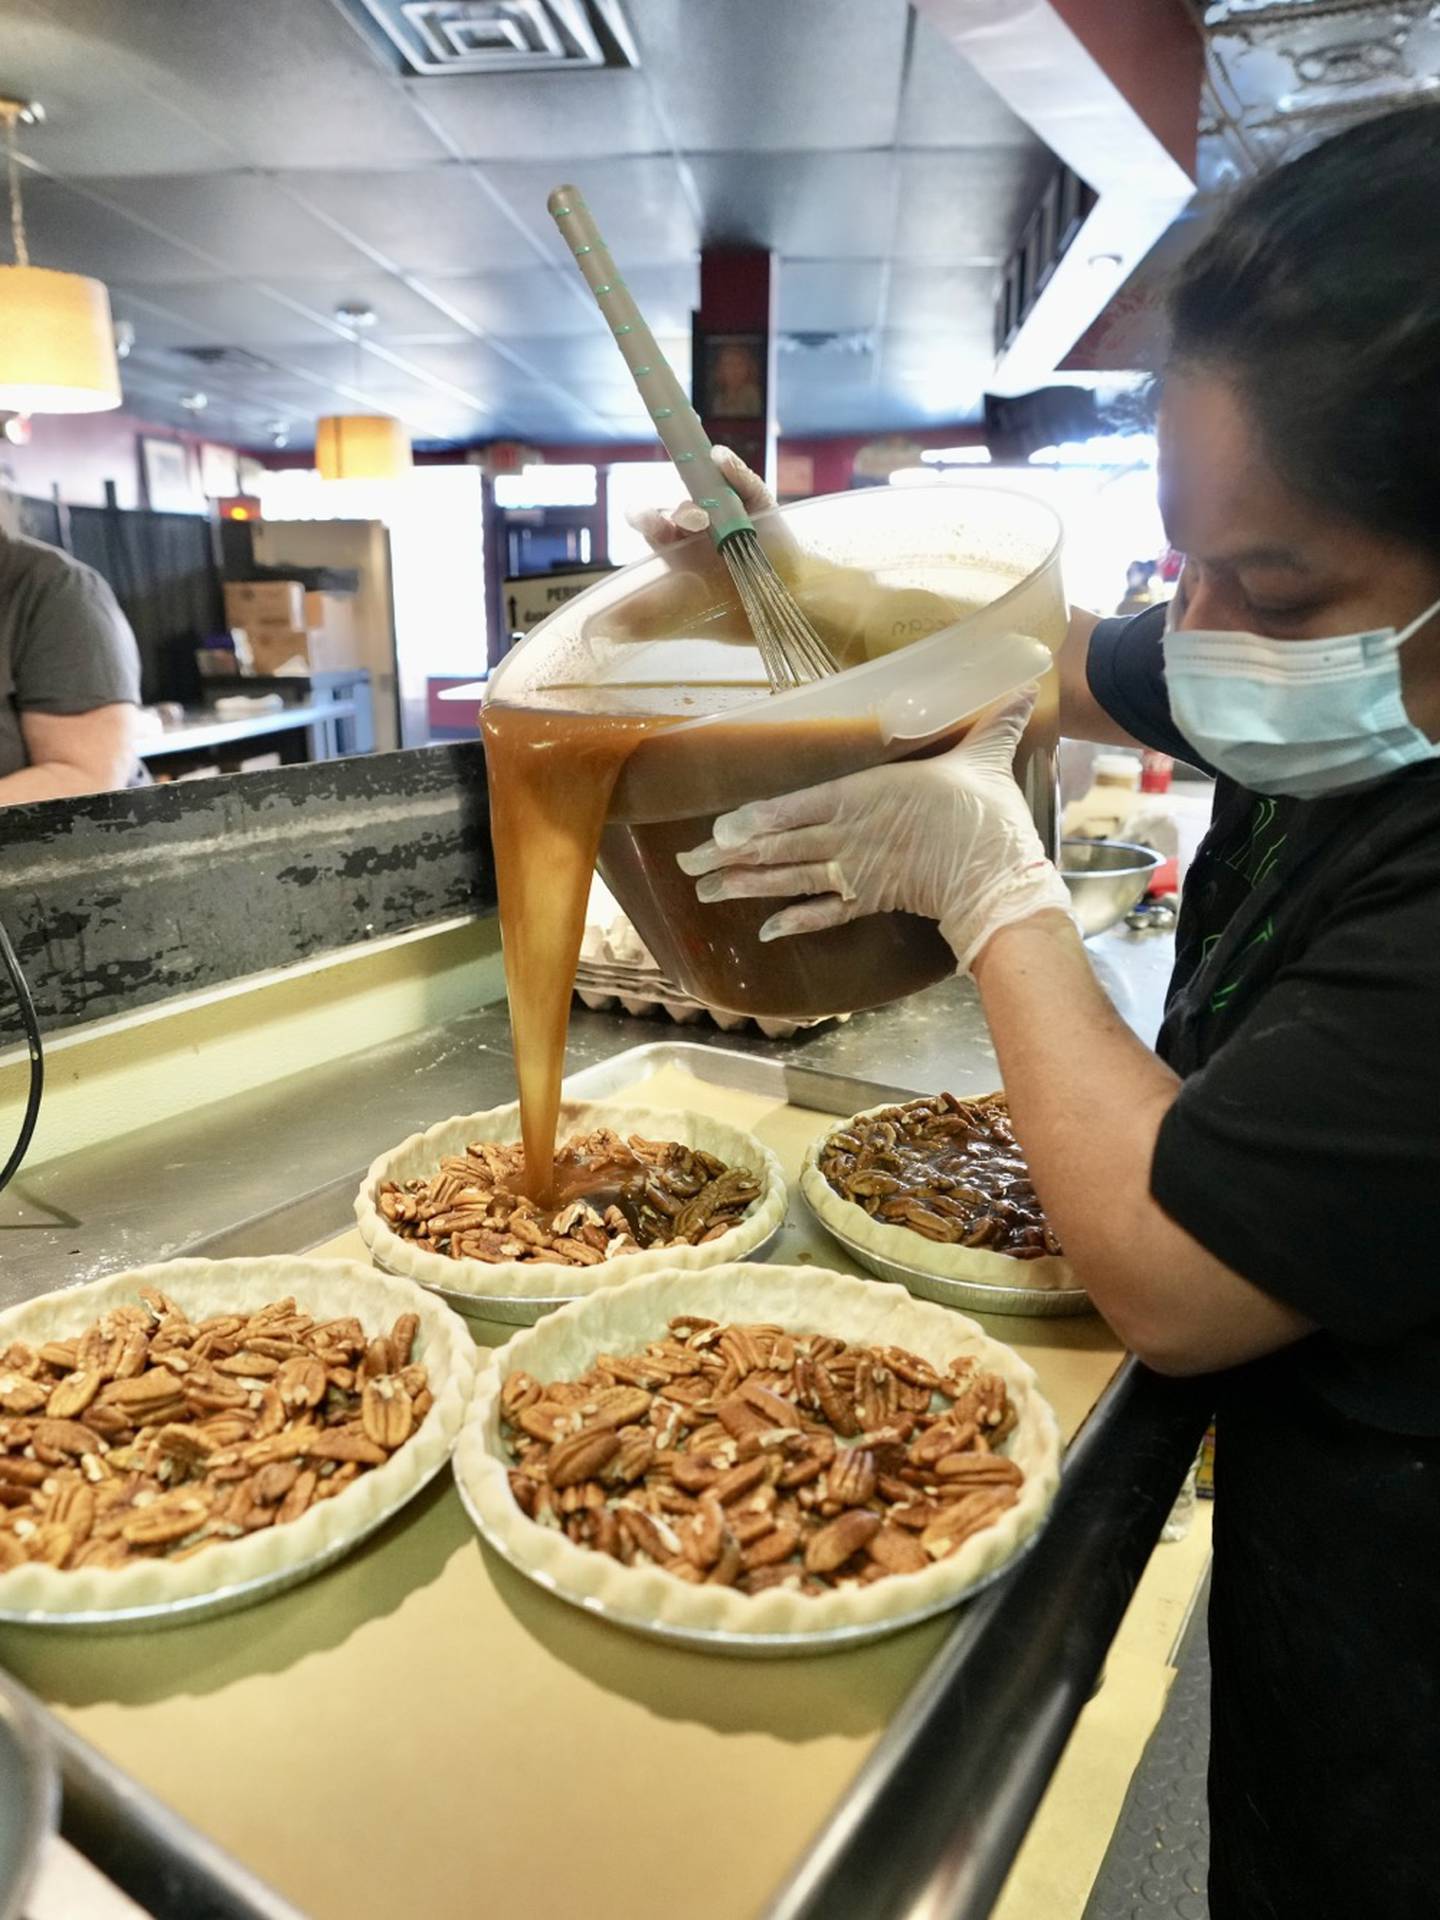 Pie crust gets perfected a the popular pie shop at Dangerously Delicious. (Kaitlin Newman / The Baltimore Banner)